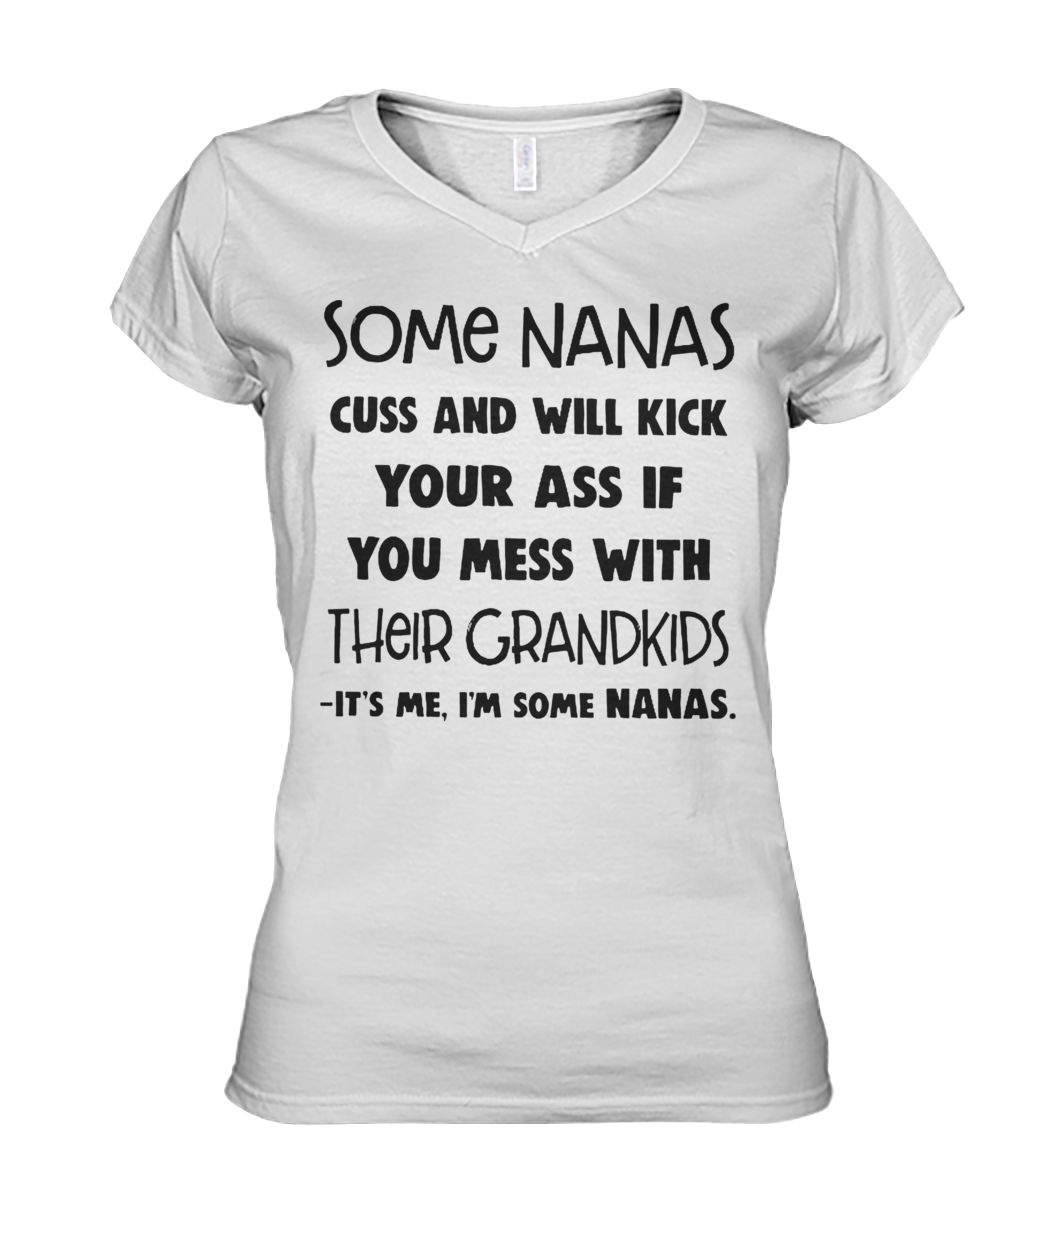 Some nanas cuss and will kick your ass if you mess with their grandkids women's v-neck